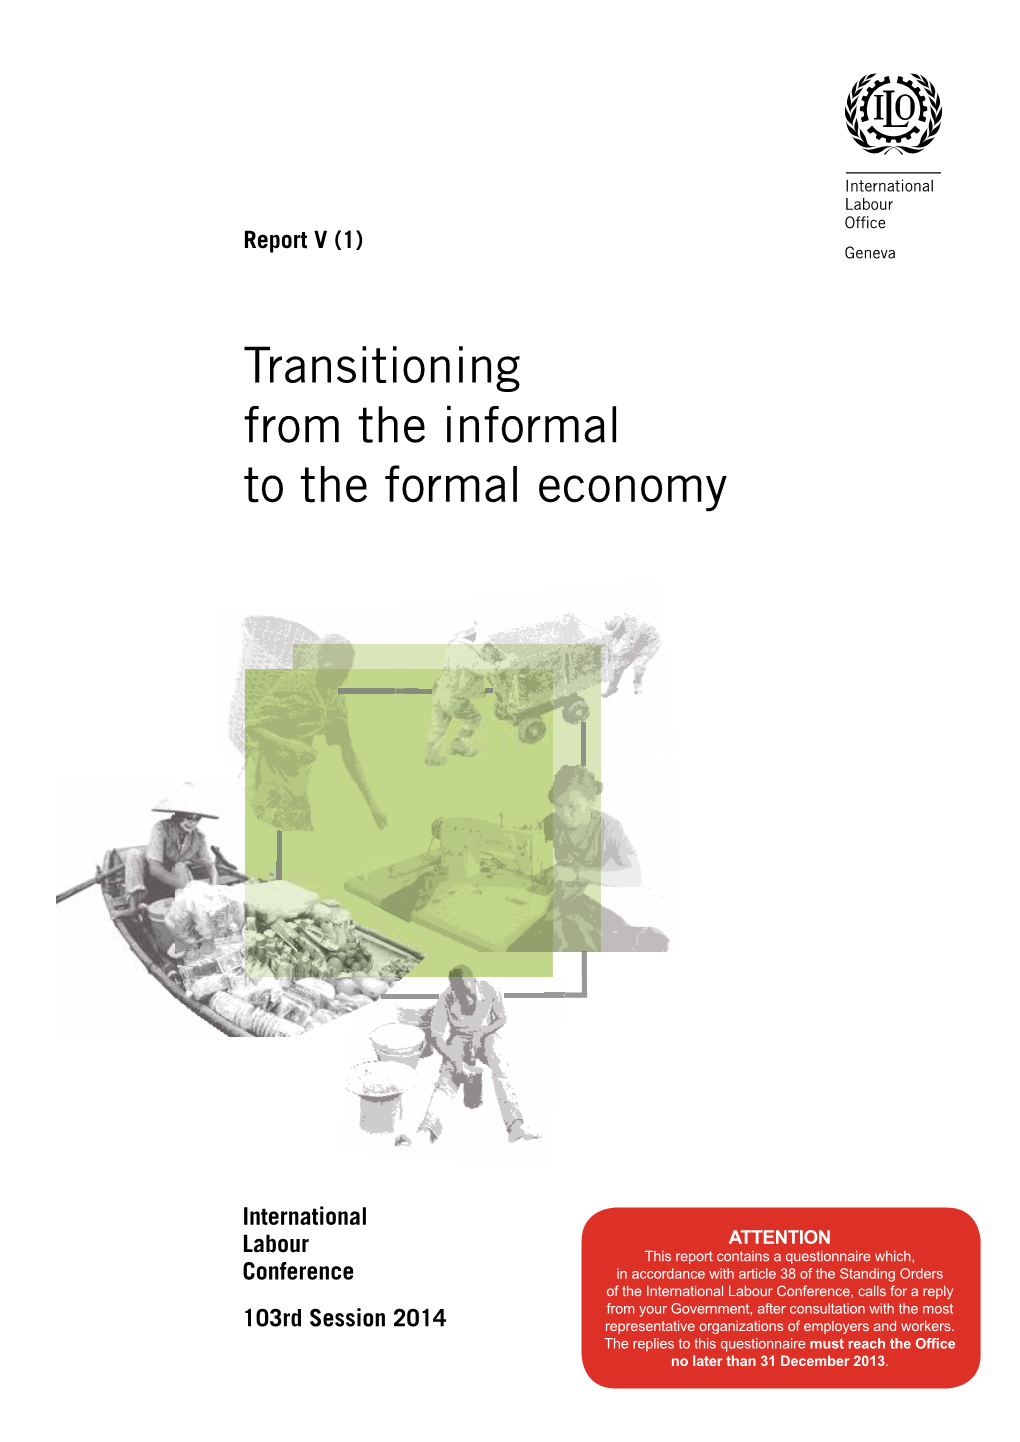 Transitioning from the Informal to the Formal Economy